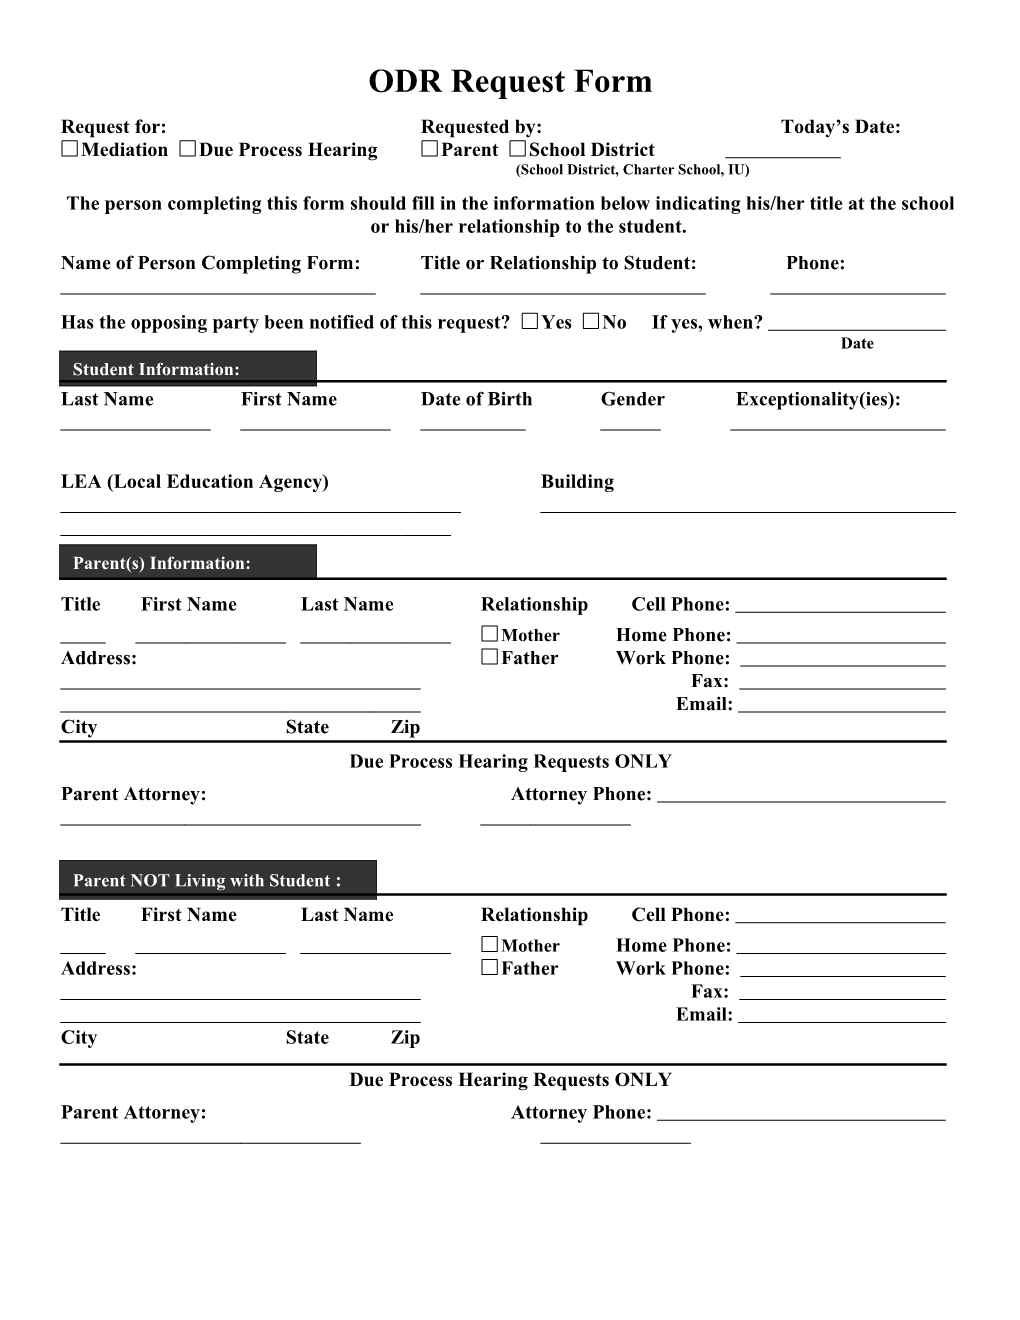 ODR Request Form